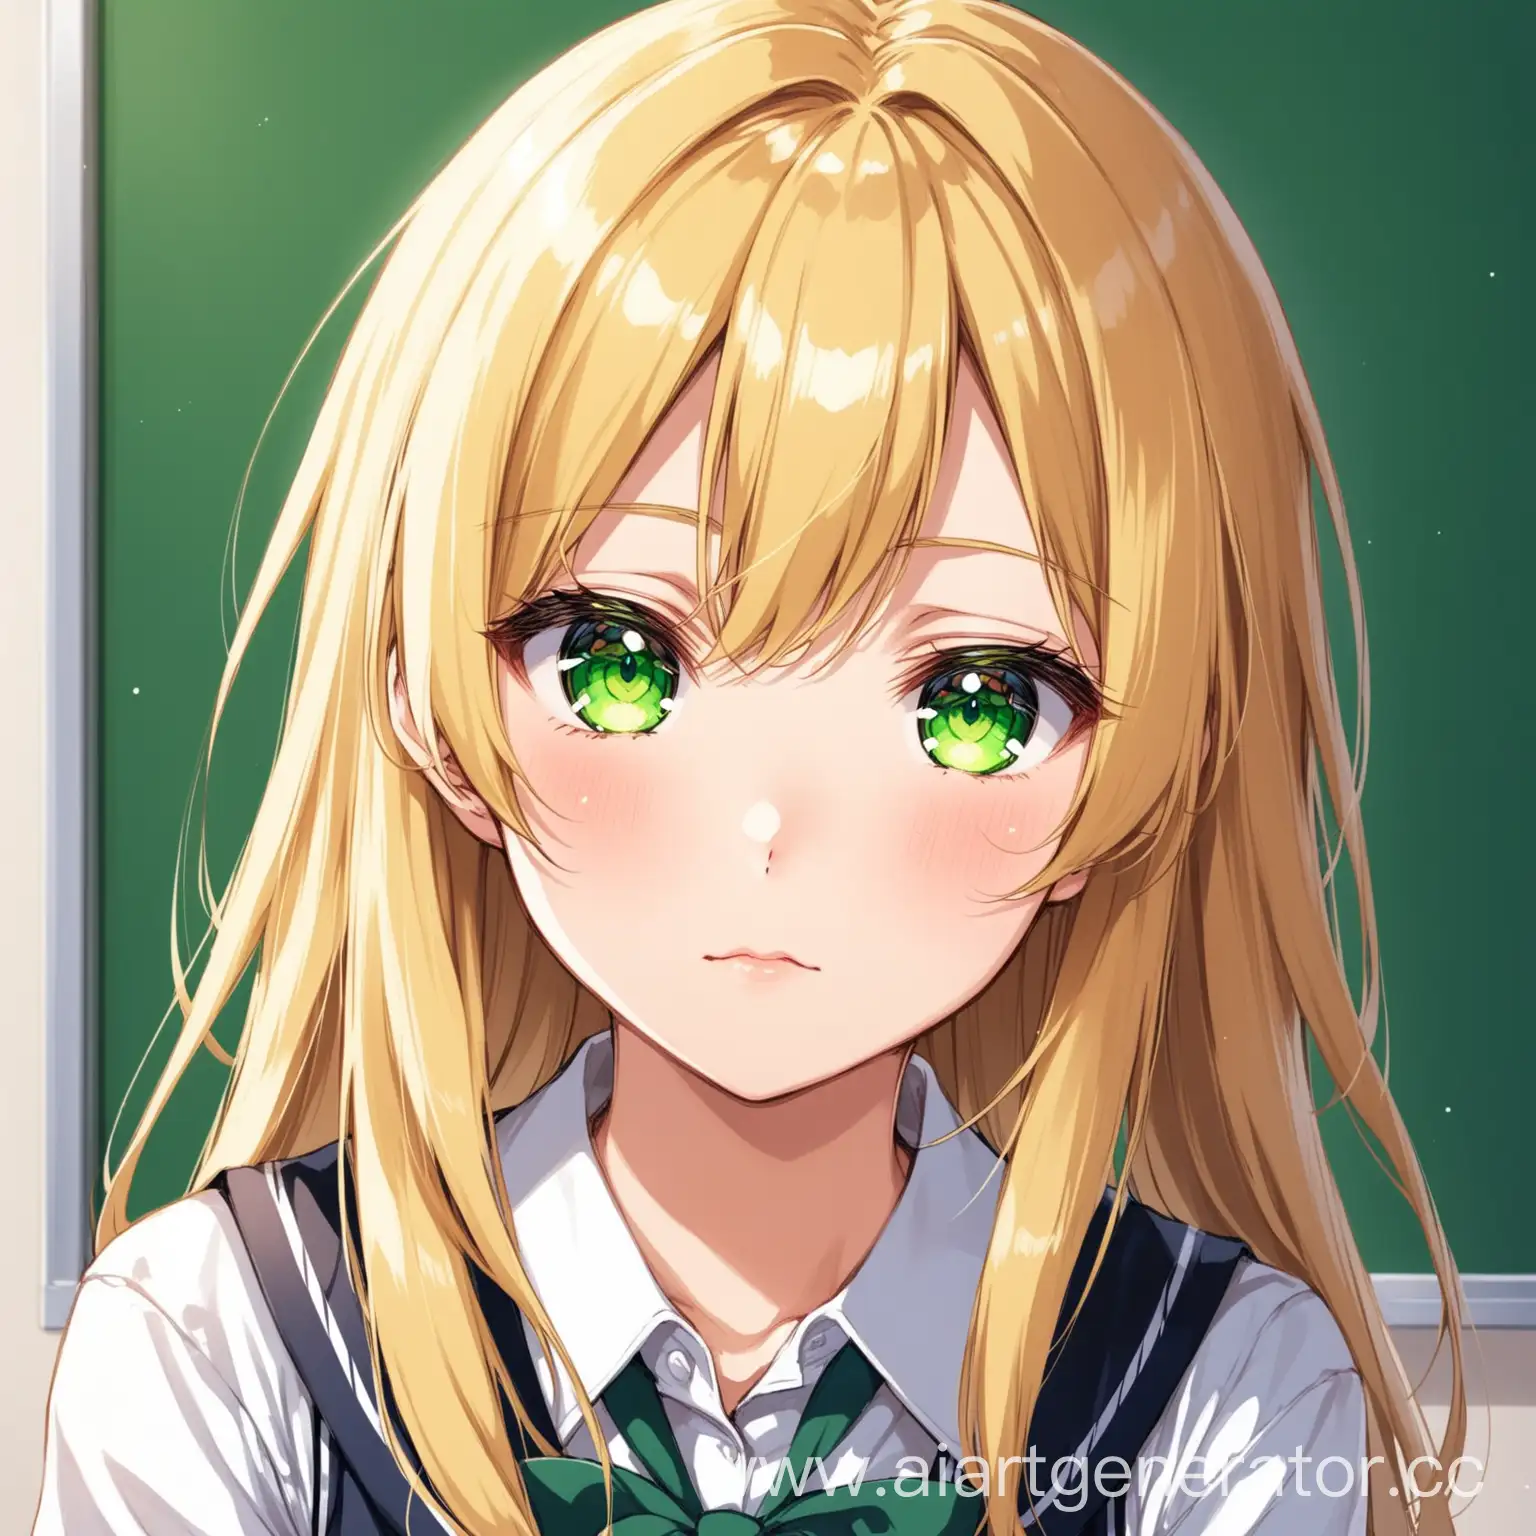 Blonde-Anime-Girl-with-Green-Eyes-and-School-Uniform-Cute-Character-Illustration